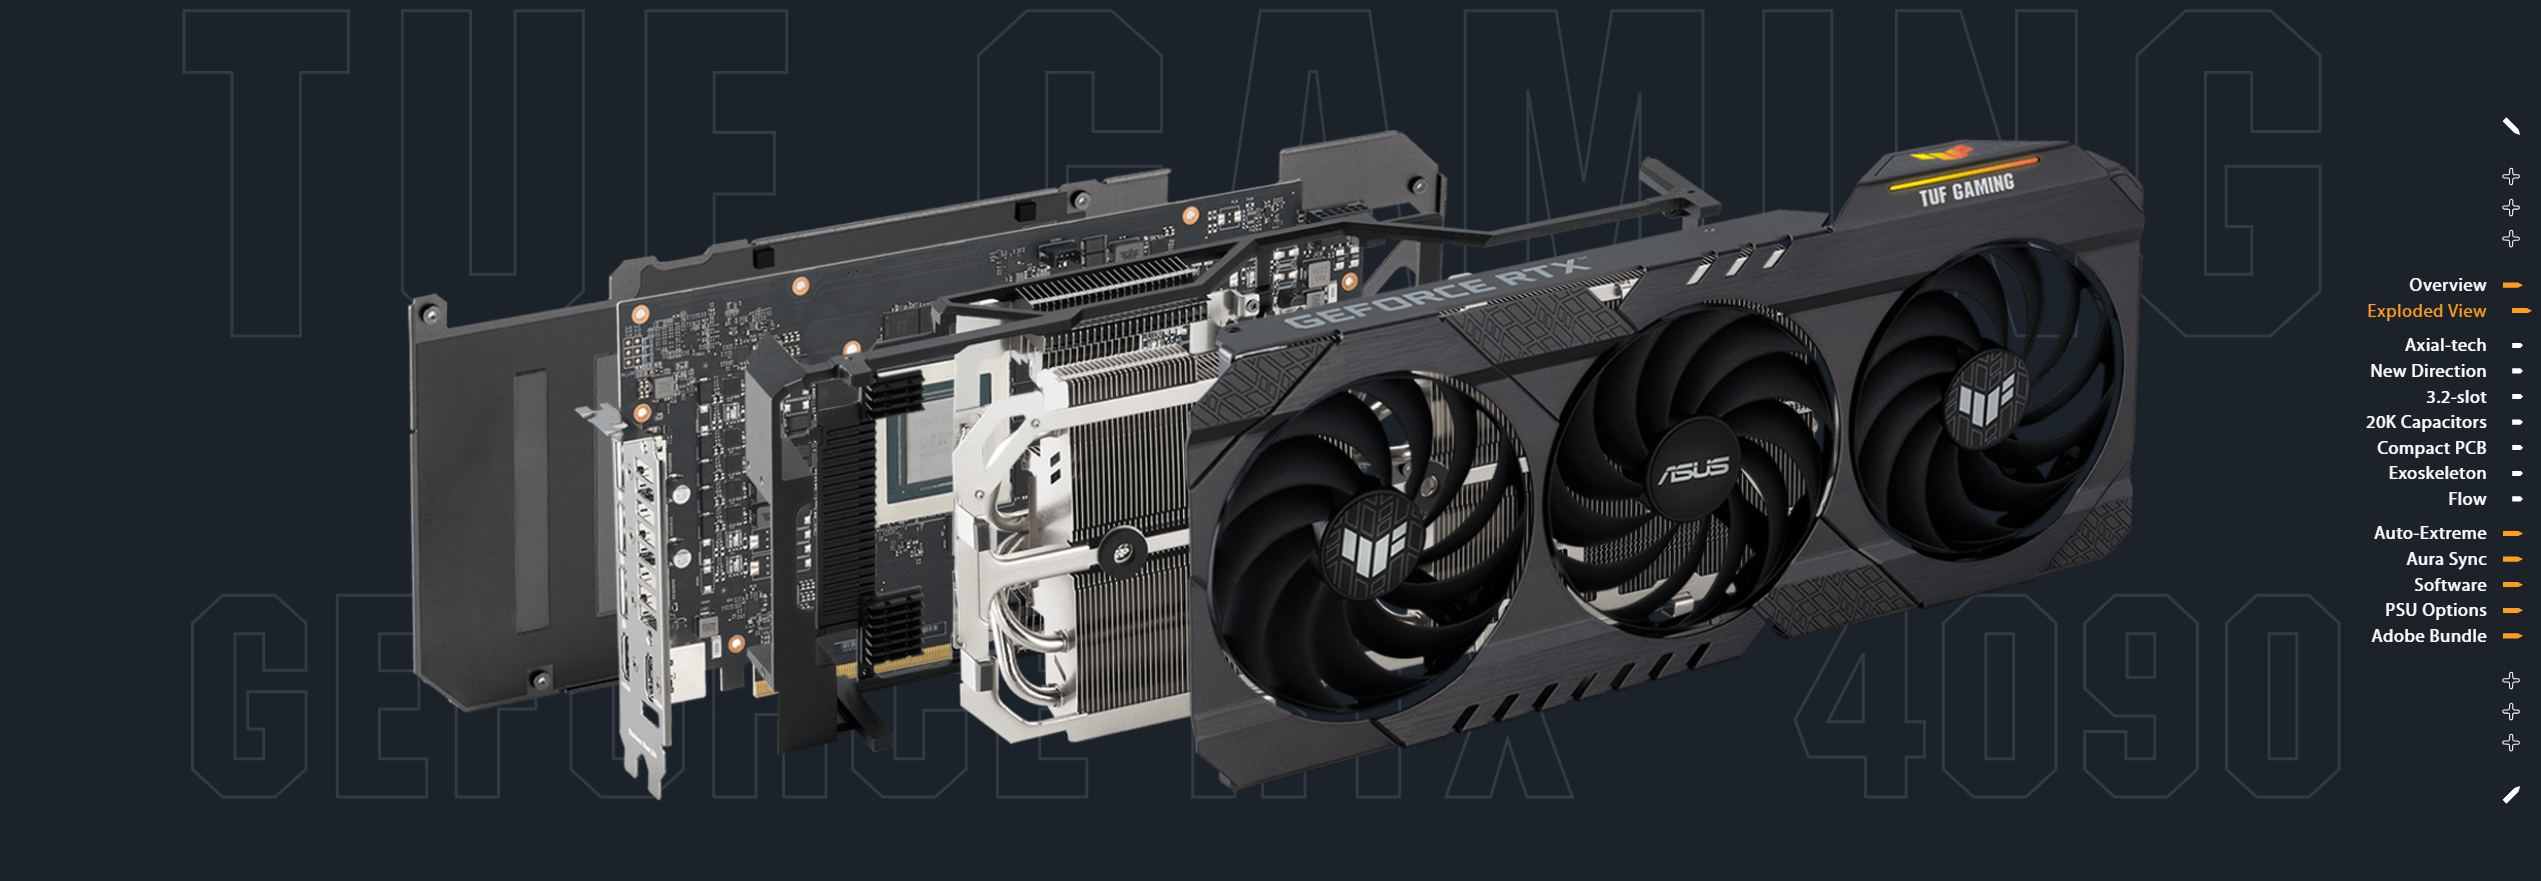 A large marketing image providing additional information about the product ASUS GeForce RTX 4090 TUF Gaming 24GB GDDR6X - Additional alt info not provided